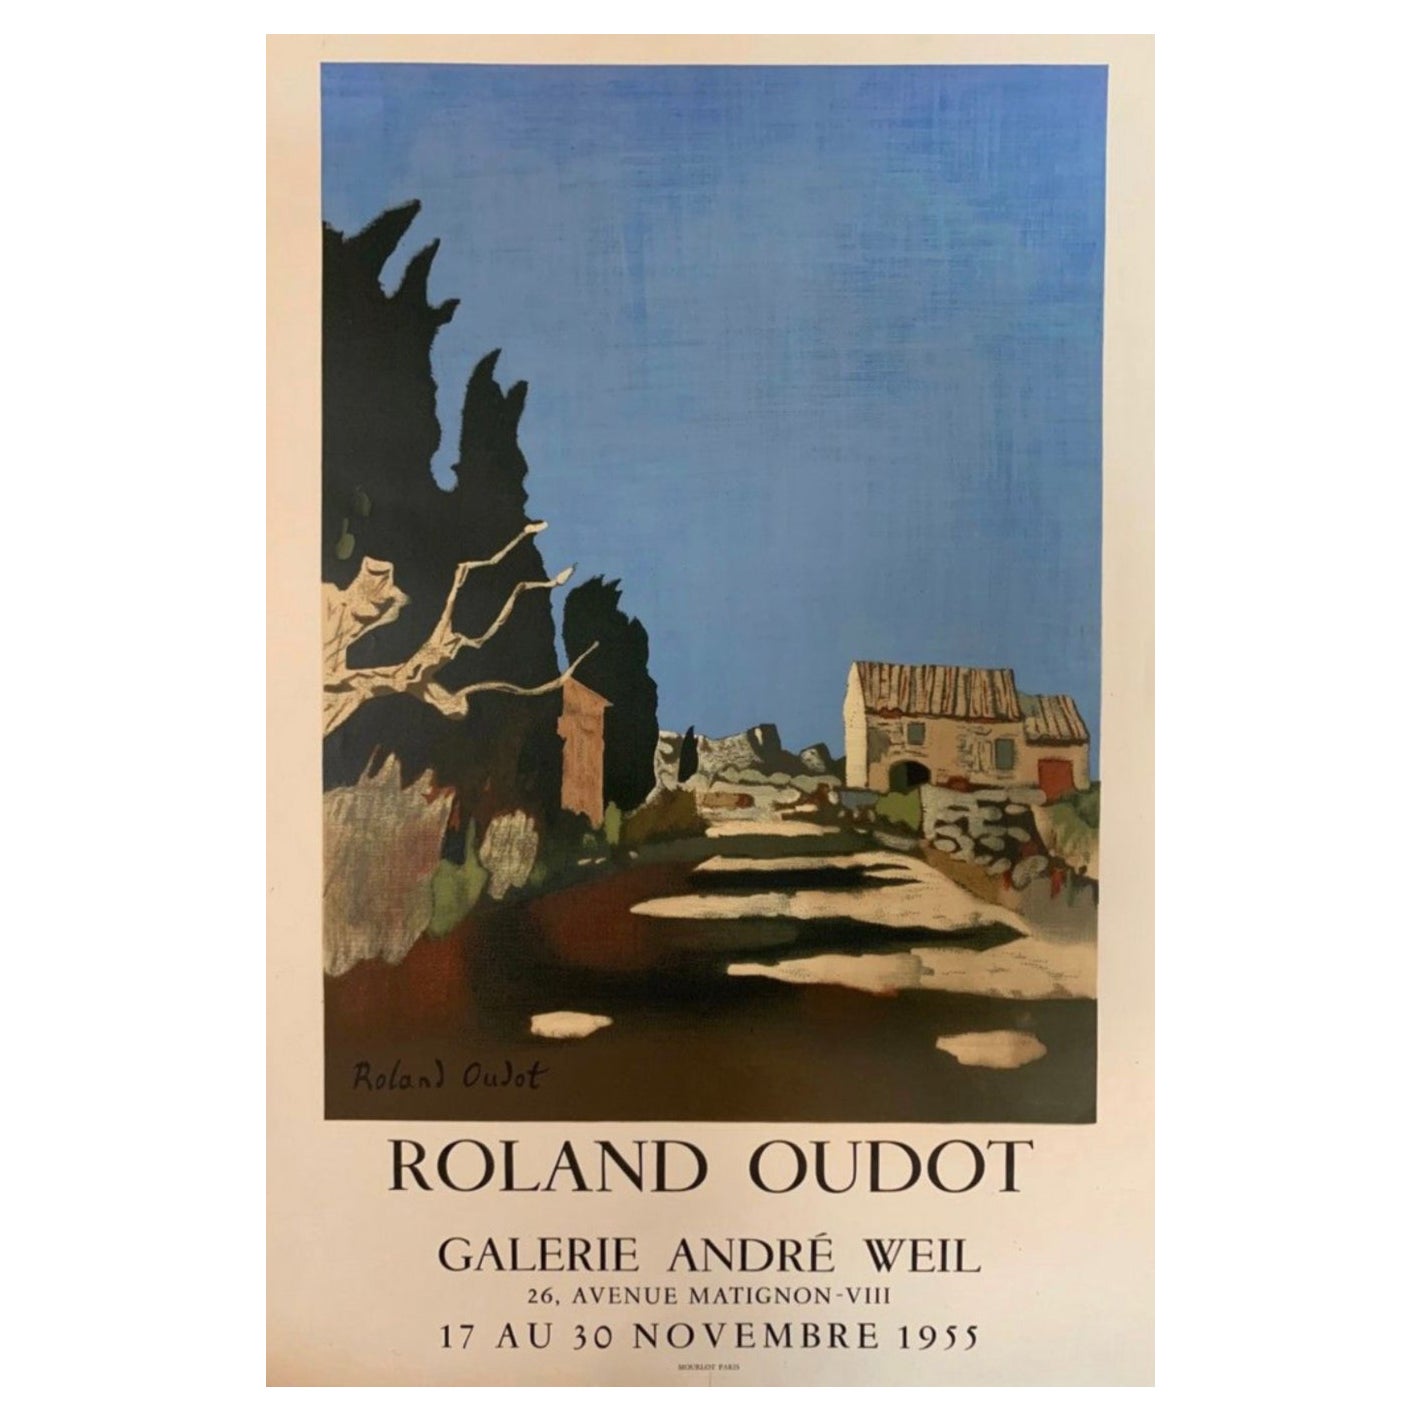 Original French Art Exhibition Poster, Roland Oudot, Galerie Andre Weil, 1955